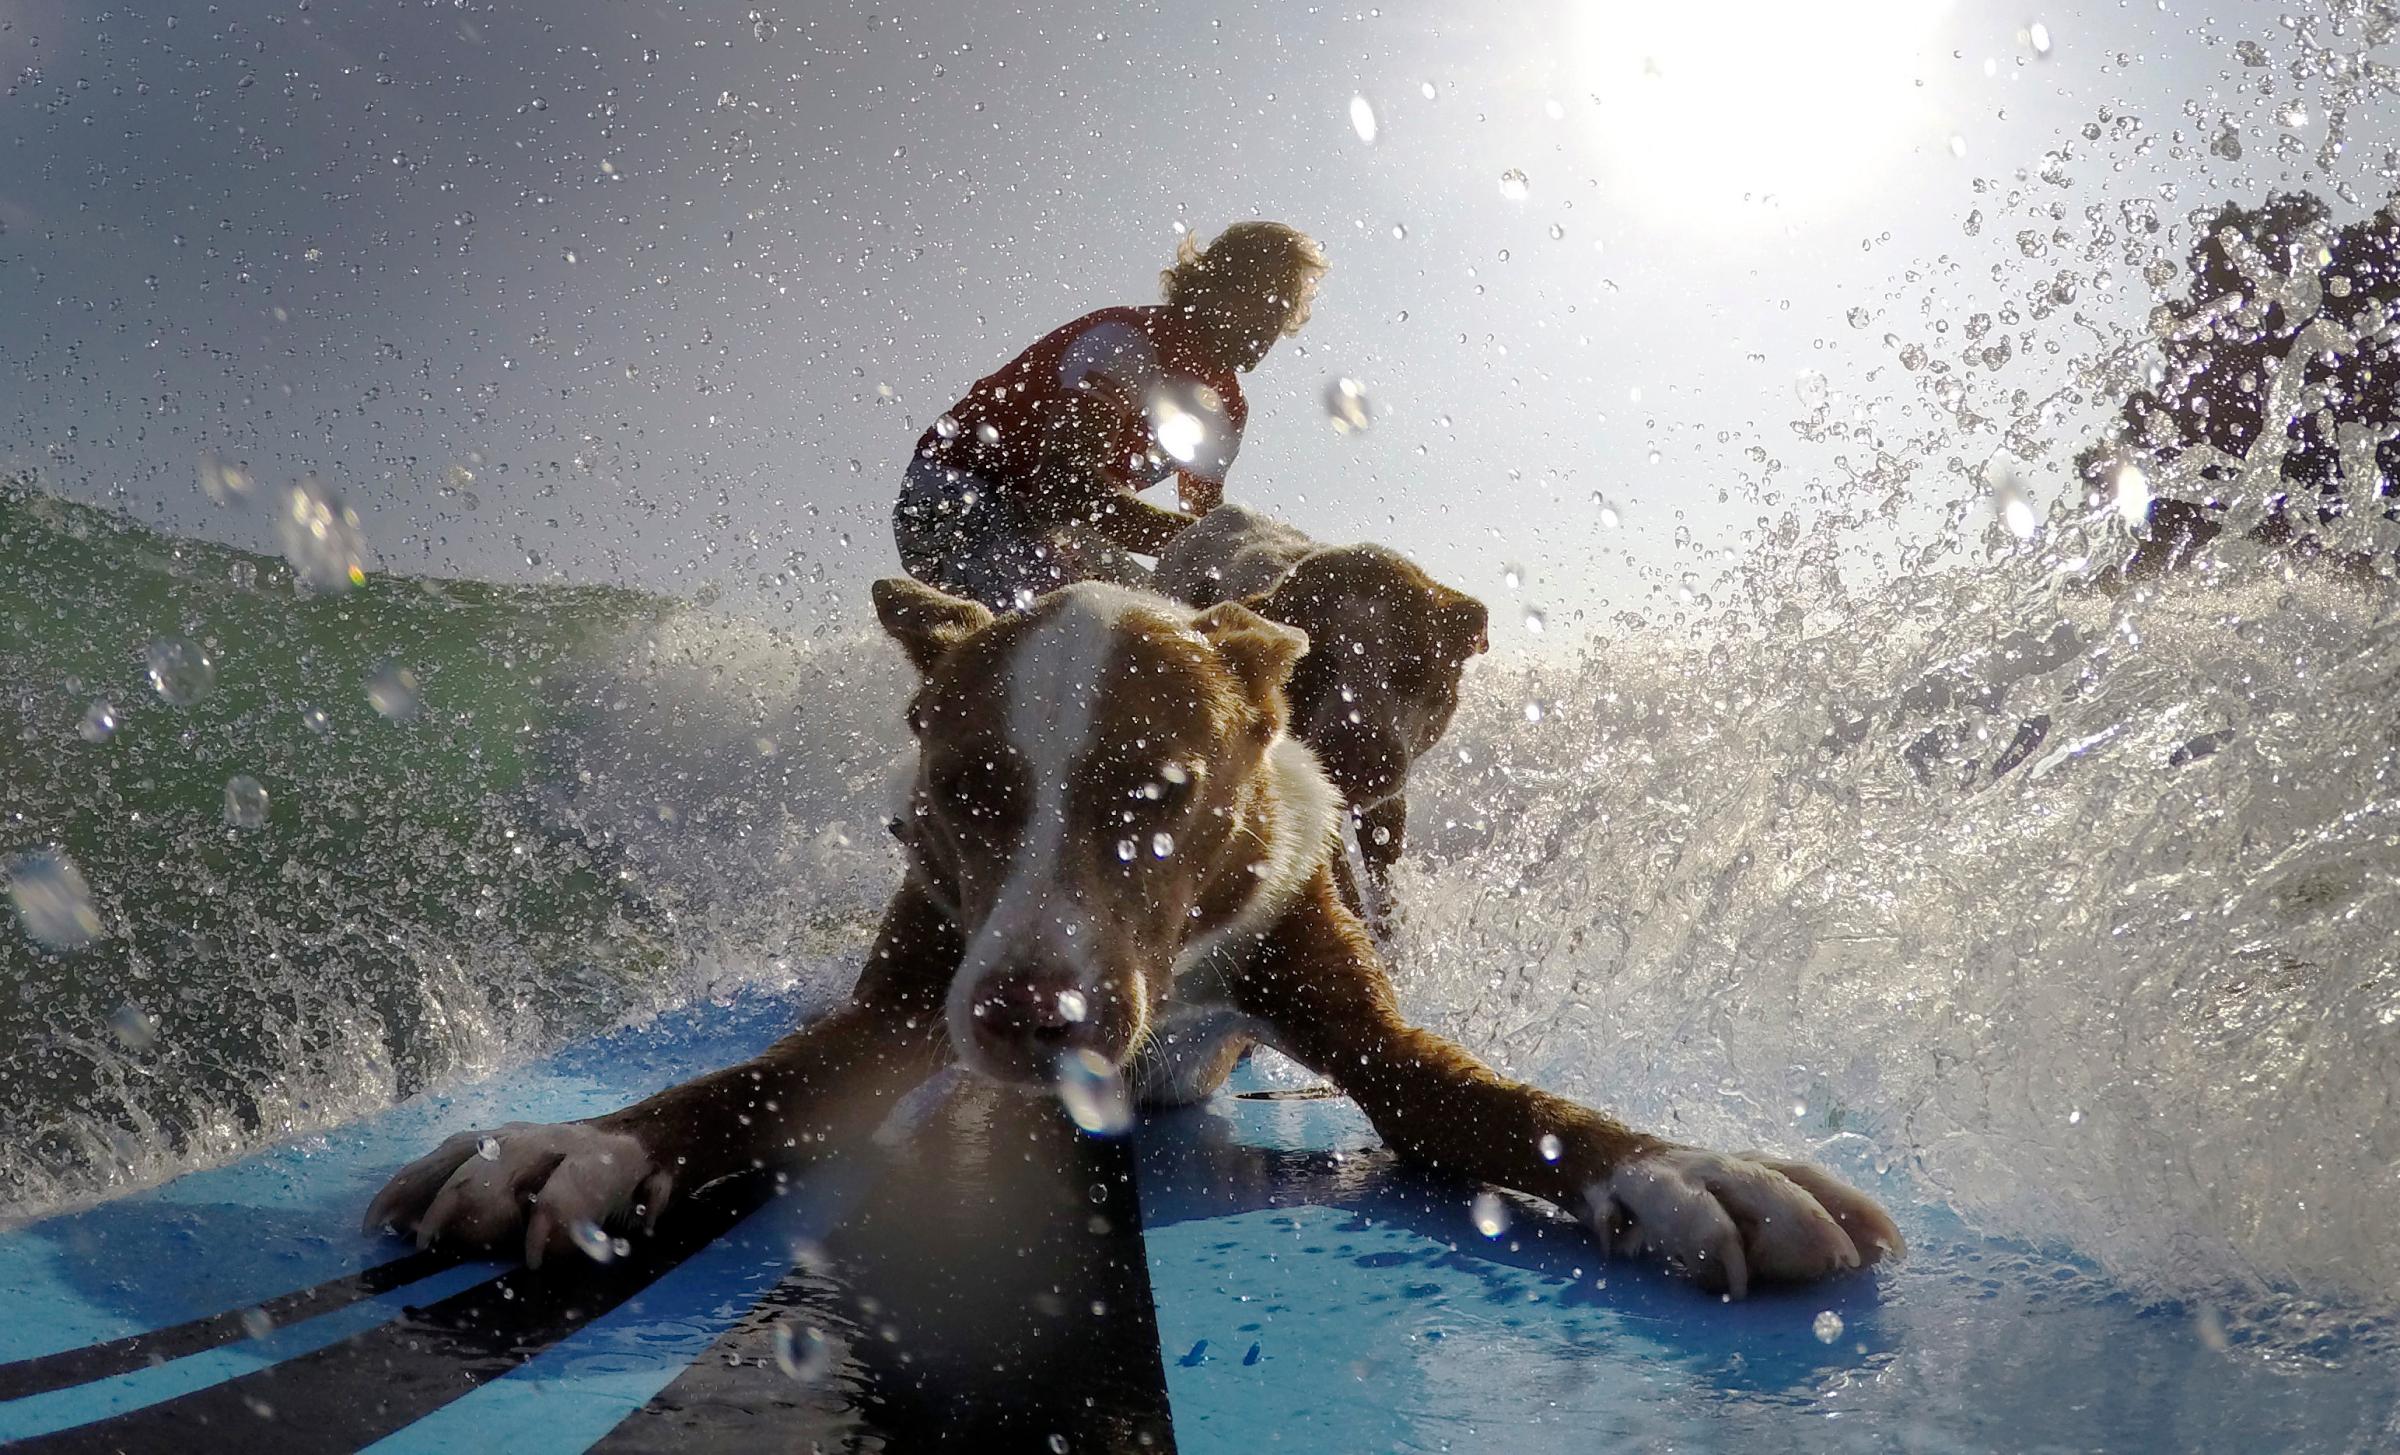 Australian dog trainer and former surfing champion Chris de Aboitiz rides a wave with his dogs Rama and Millie off Sydney's Palm Beach, Australia, on Feb. 18, 2016.